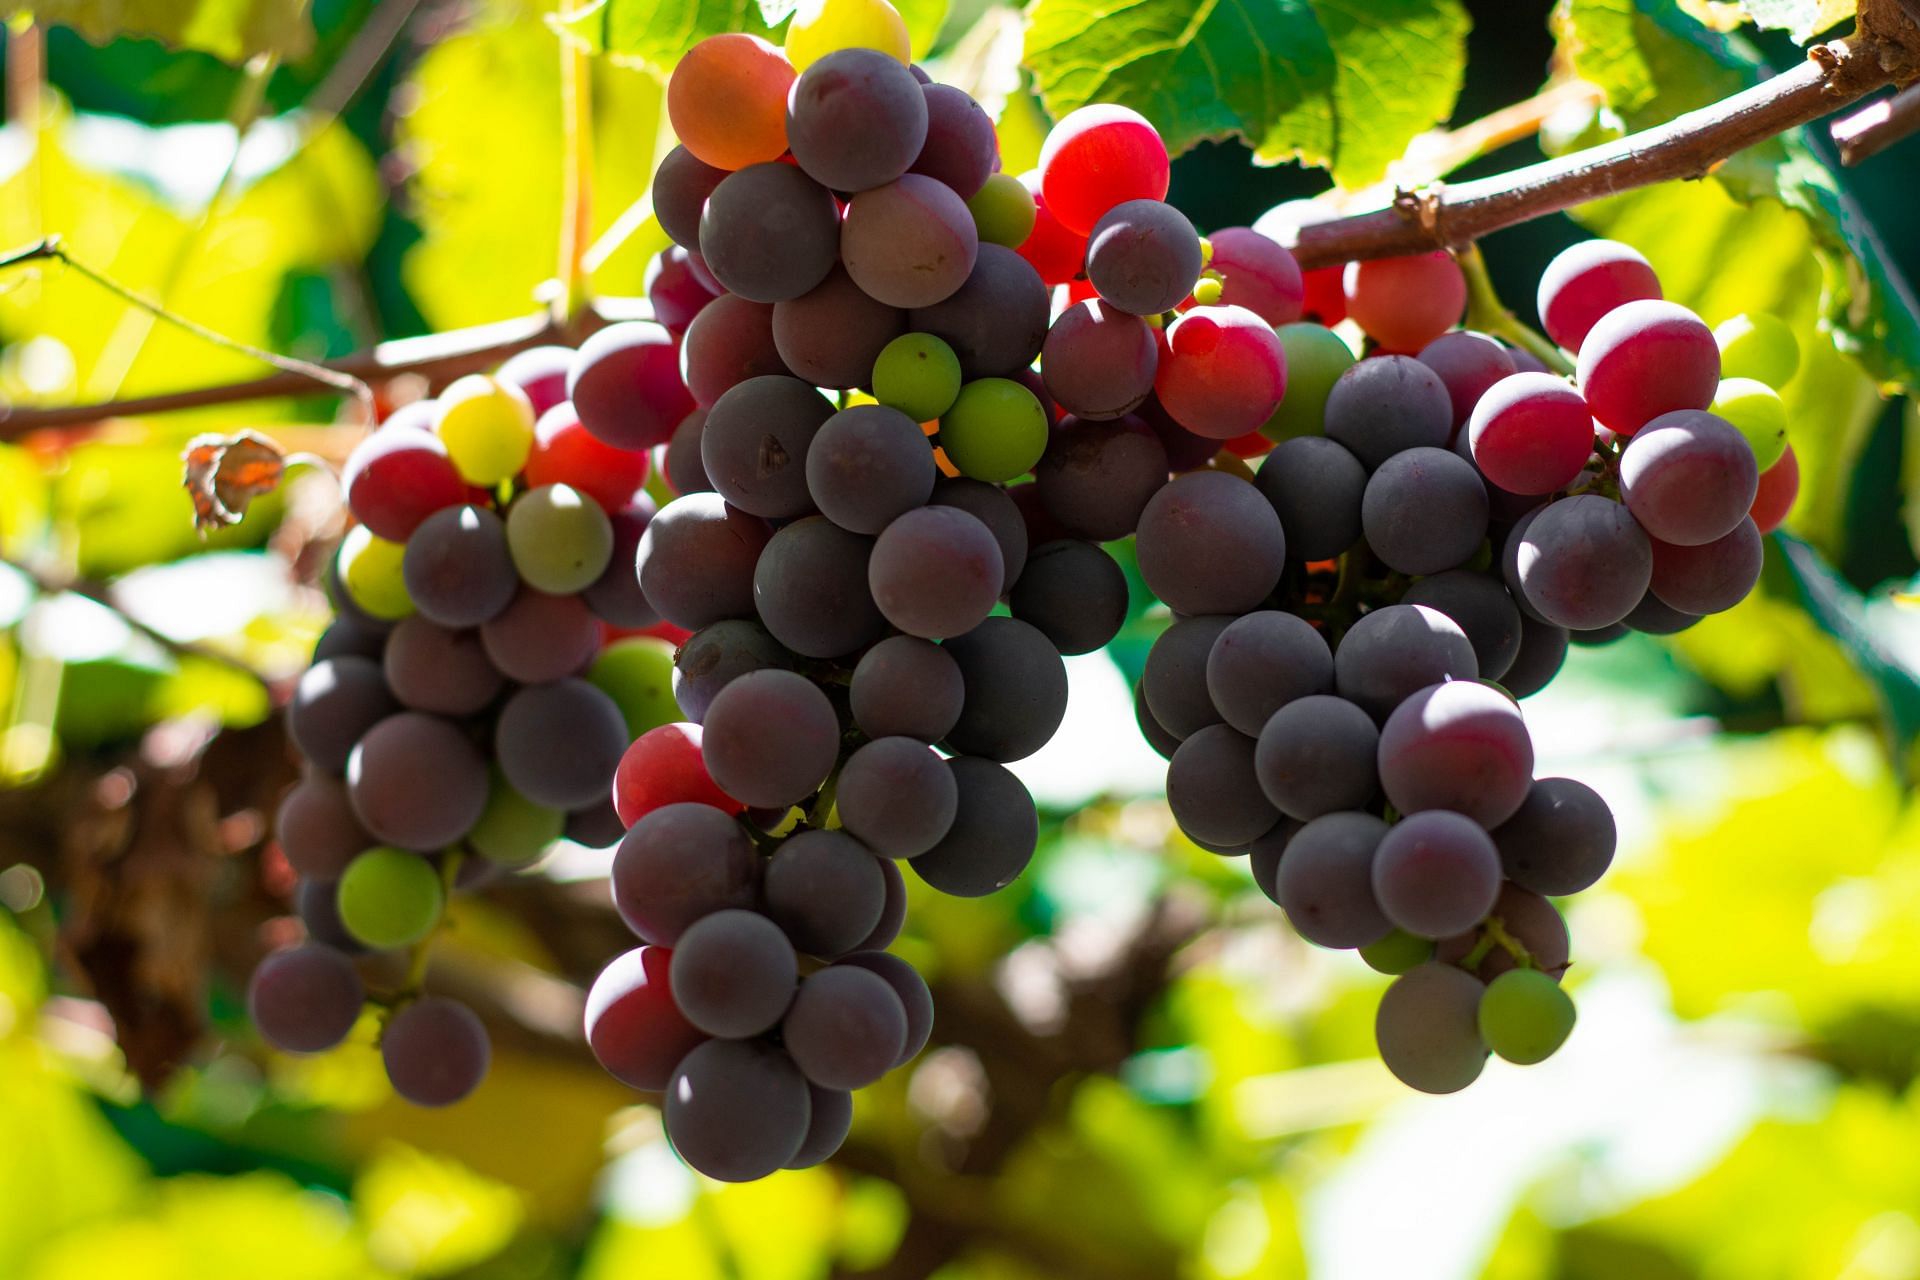 Grape seed extract is obtained from seeds of grapes. (Image via Unspalsh/ Lucas George Wendt)